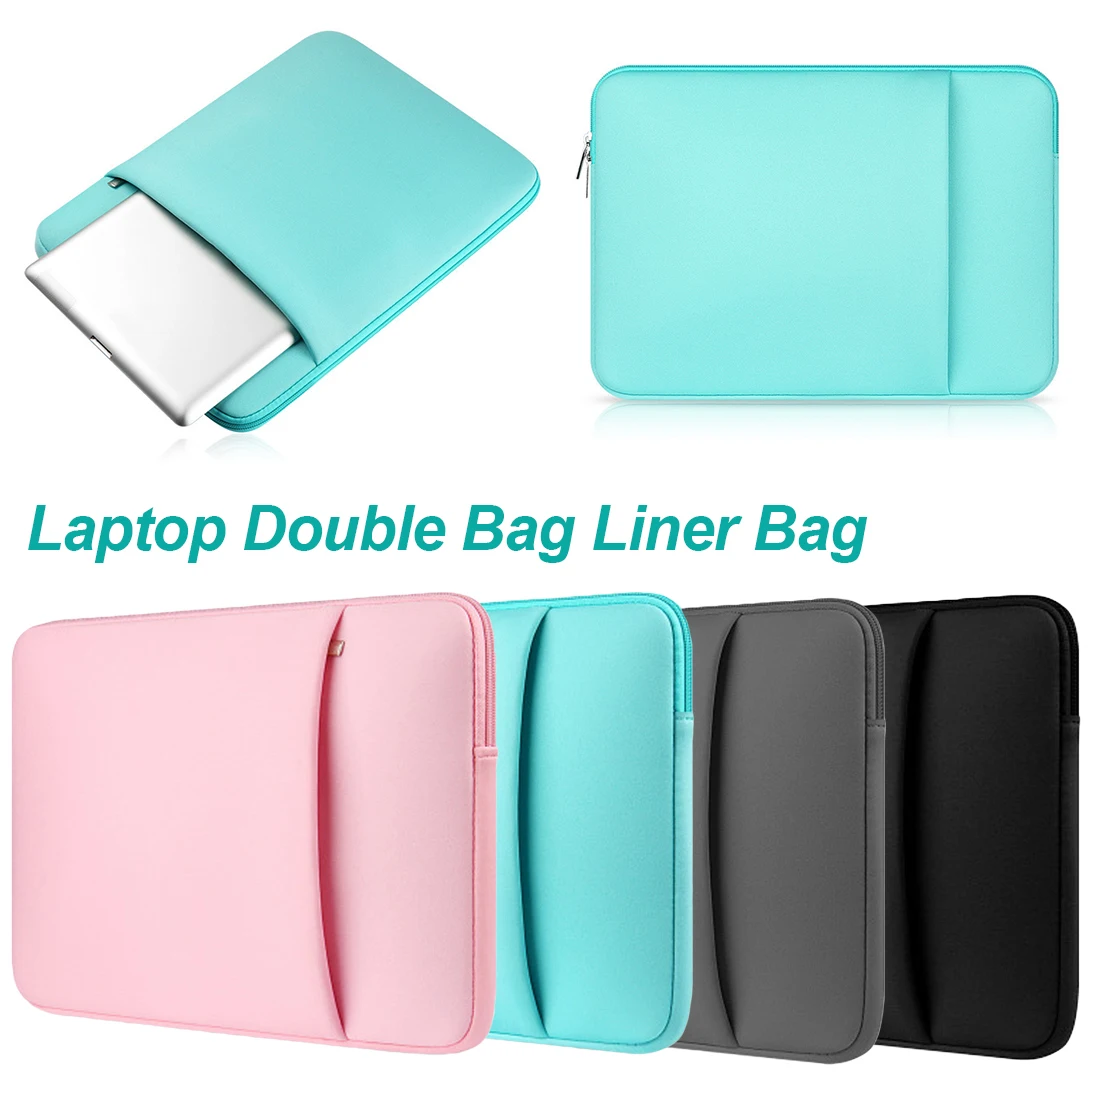 

Laptop Sleeve Bag 11" 13" 14" 15" 15.6" Notebook Case for Macbook Pro Air Retina Tablet Sleeve Cover Bag for Xiaomi Huawei HP